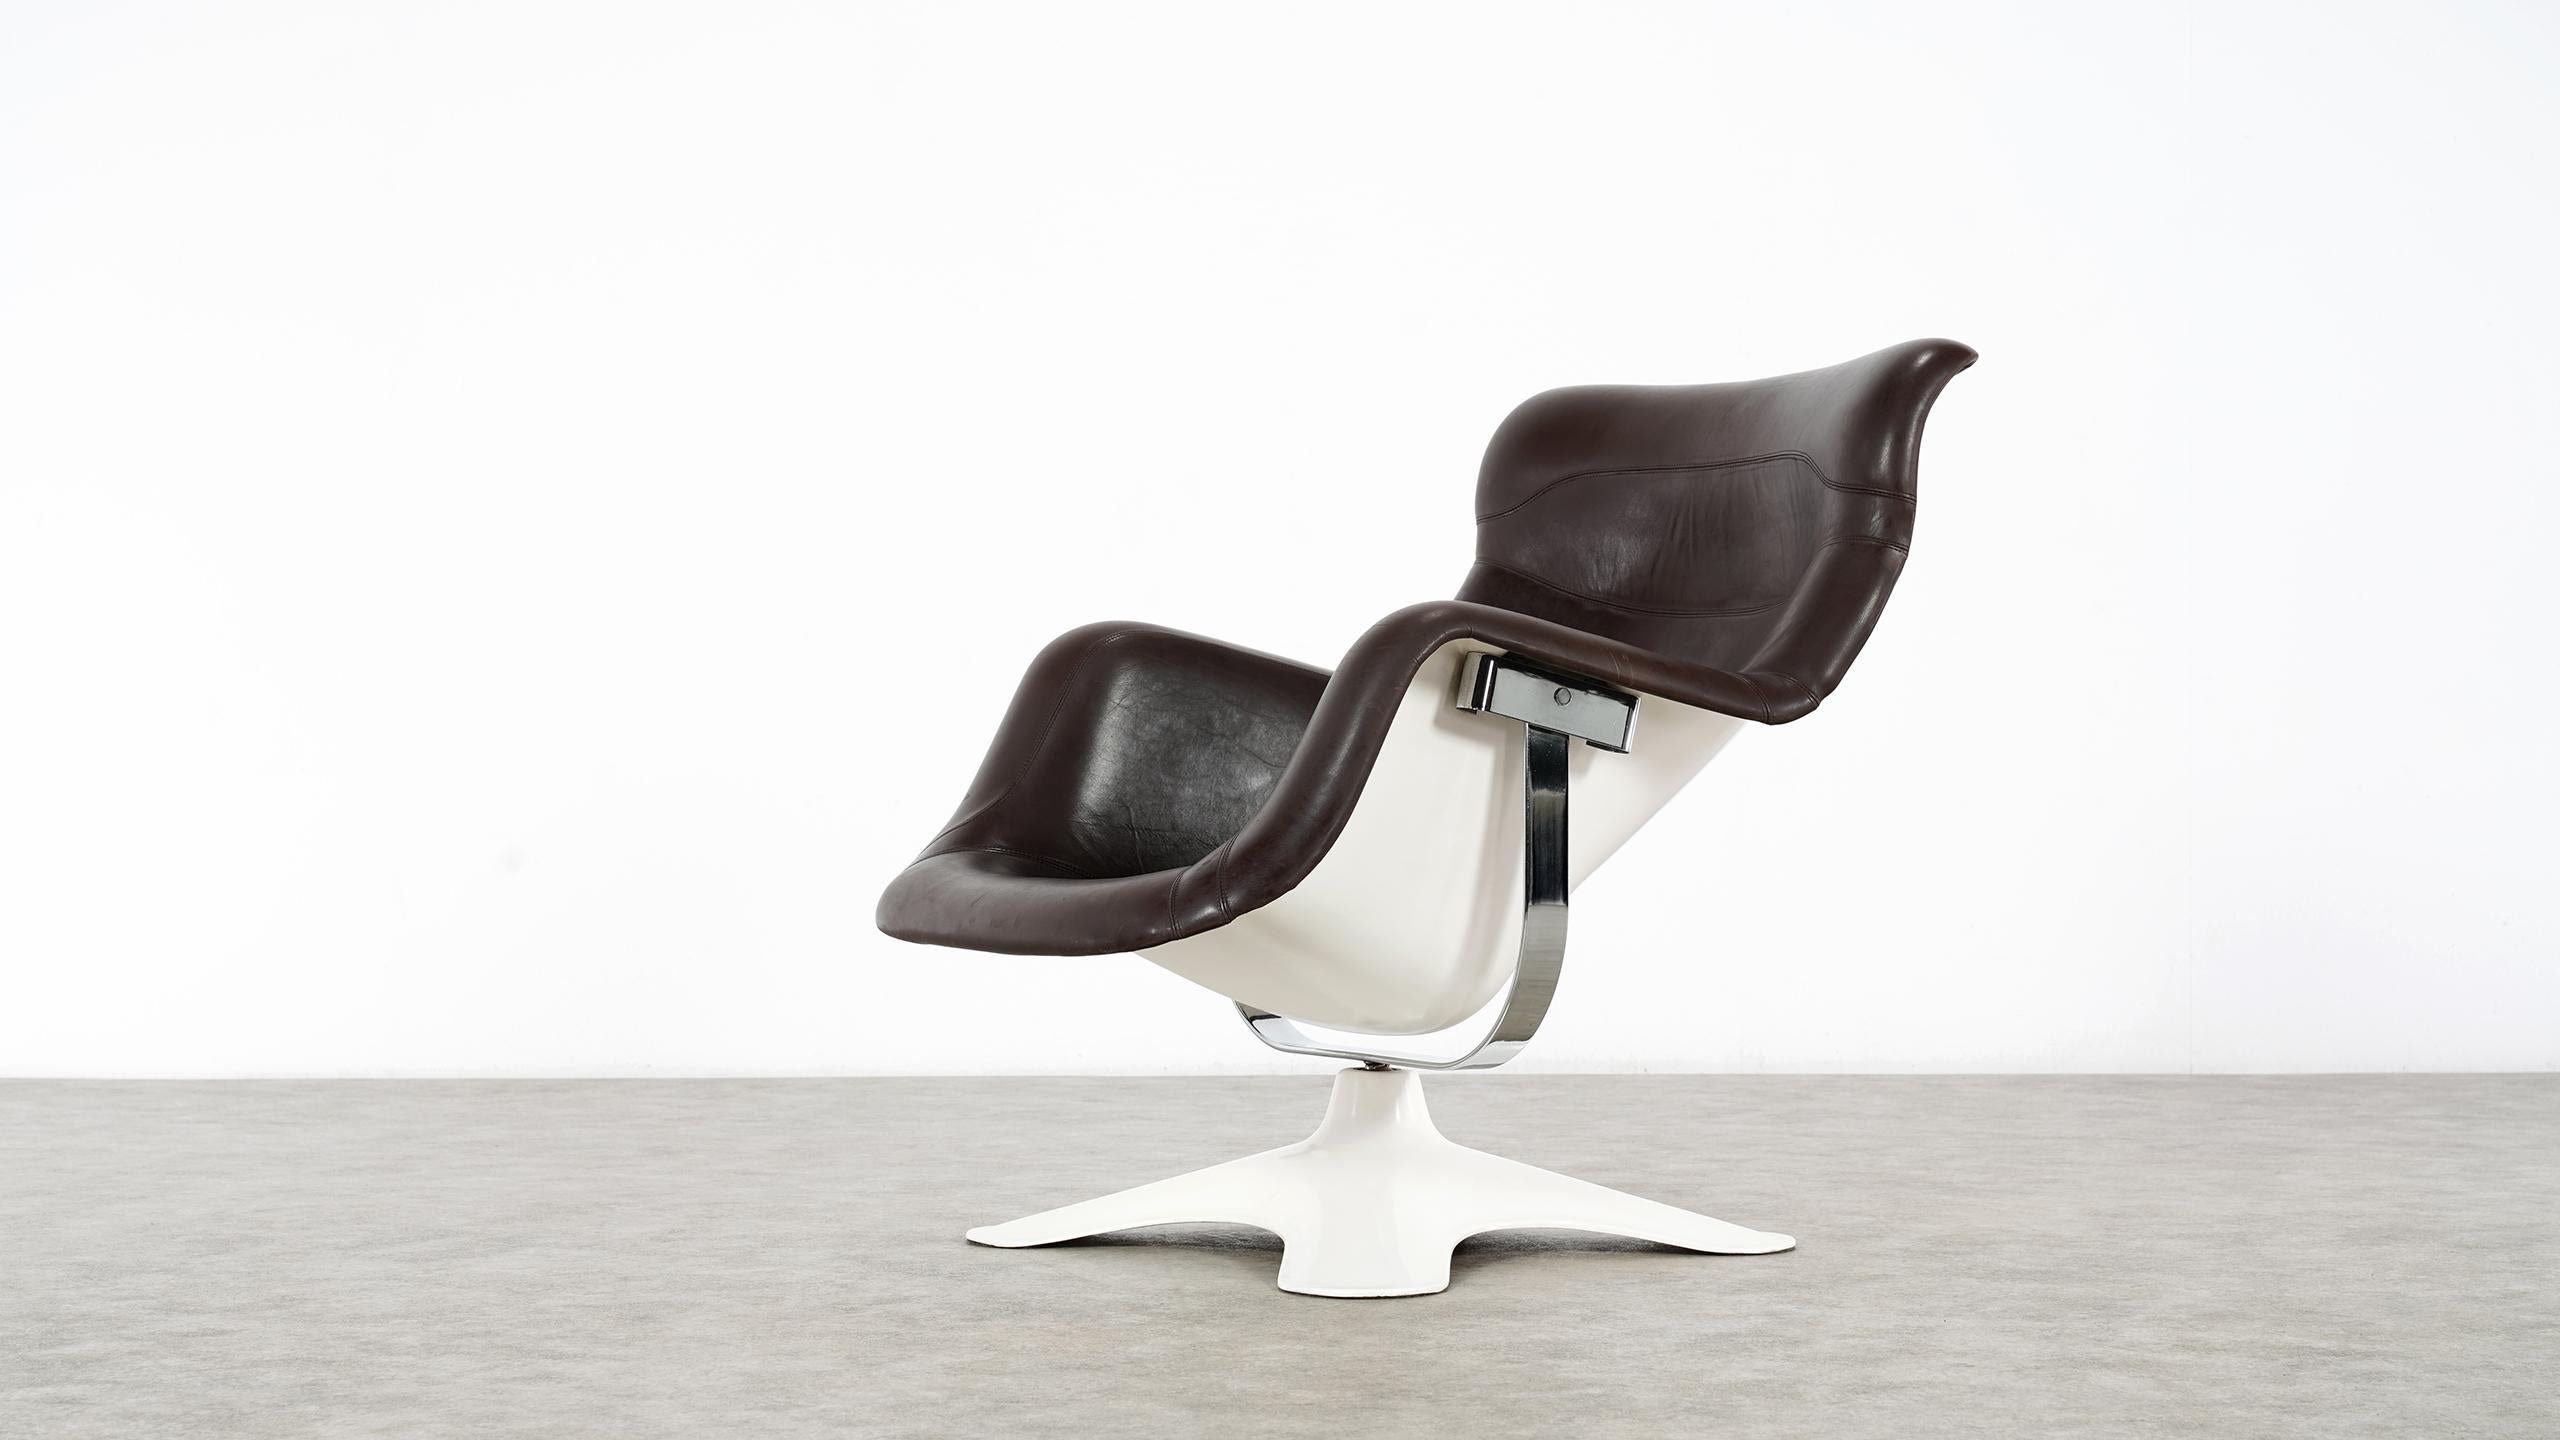 Karusselli lounge chair, designed in 1964 by Yrjö Kukkapuro for Artek, Finland.
The chair is one of the most famous designs from the Space Age of the 1960s. 

Kukkapuro's design was based on the impression of his own body in the snow. It took him